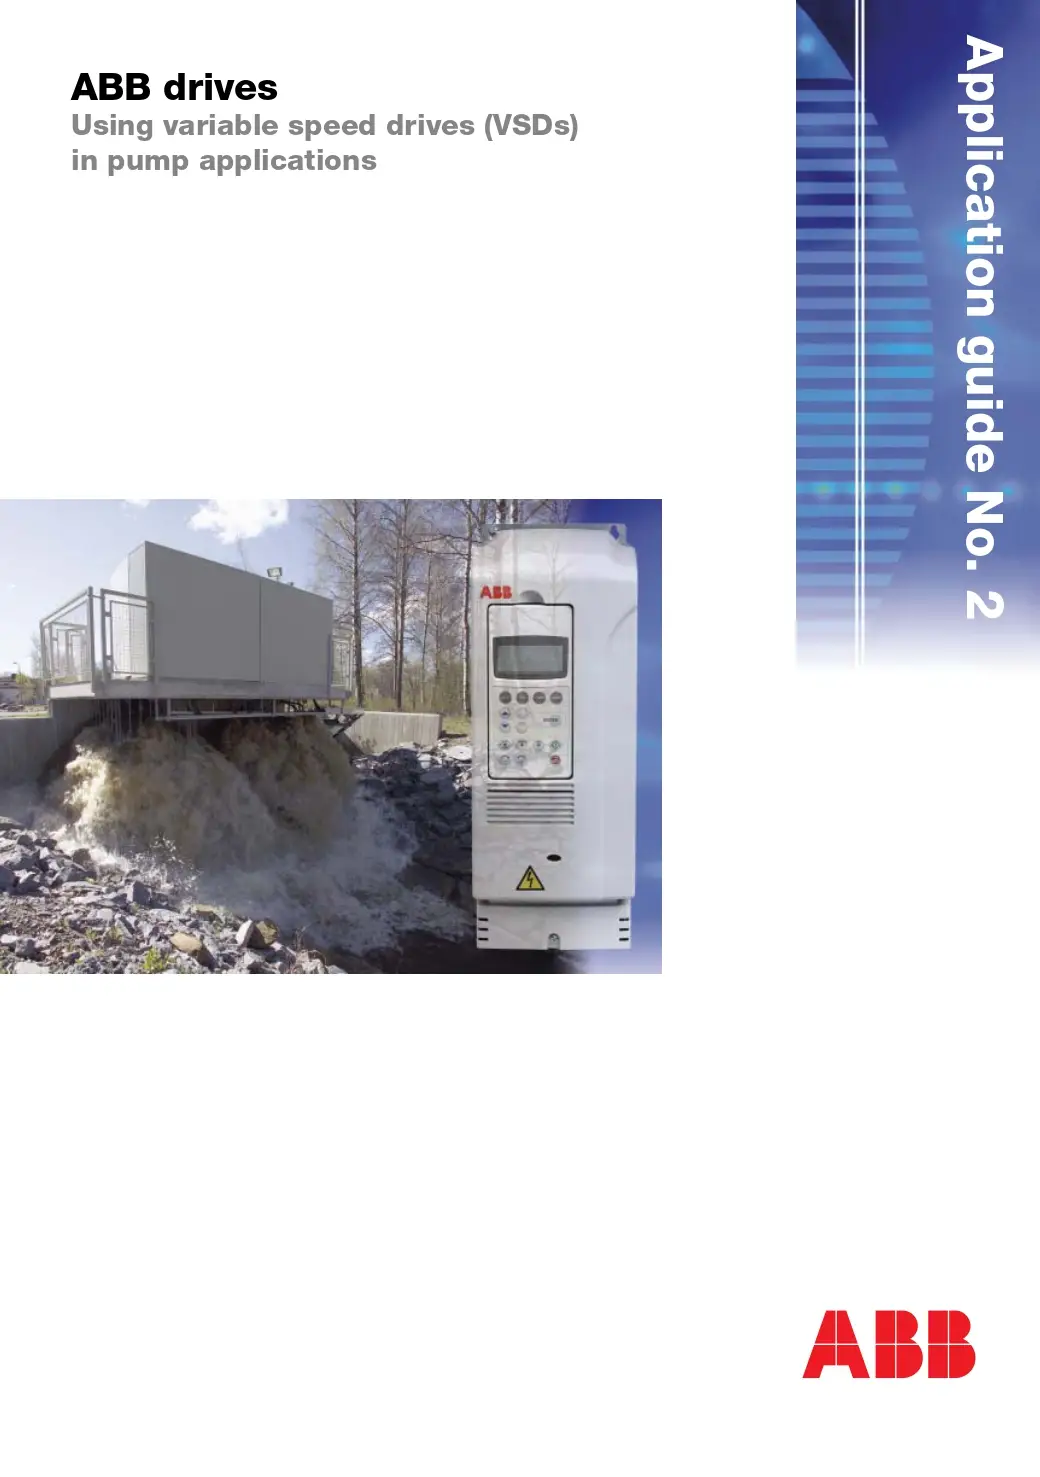 ABB Drives Using Variable Speed Drives (VSDs) in Pump Applications